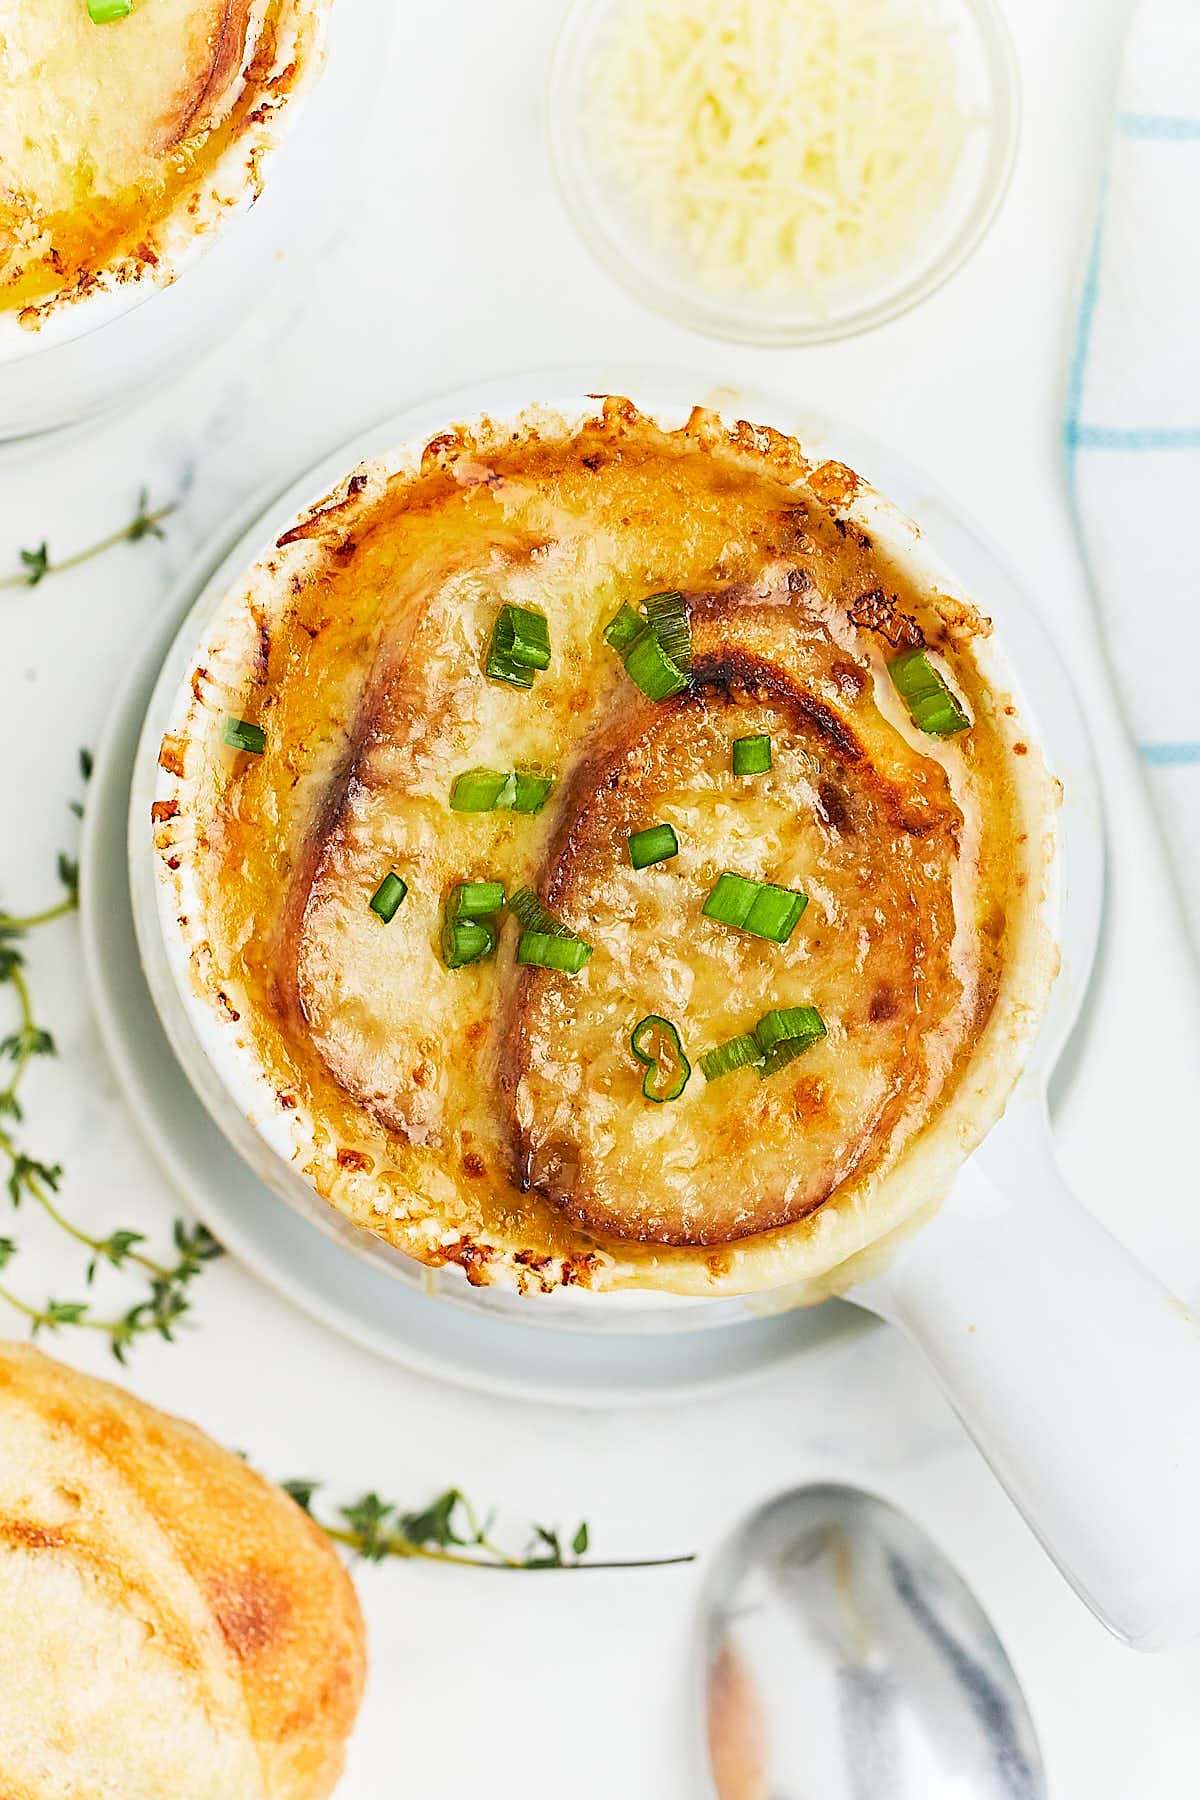 French Onion soup served in a white bowl.